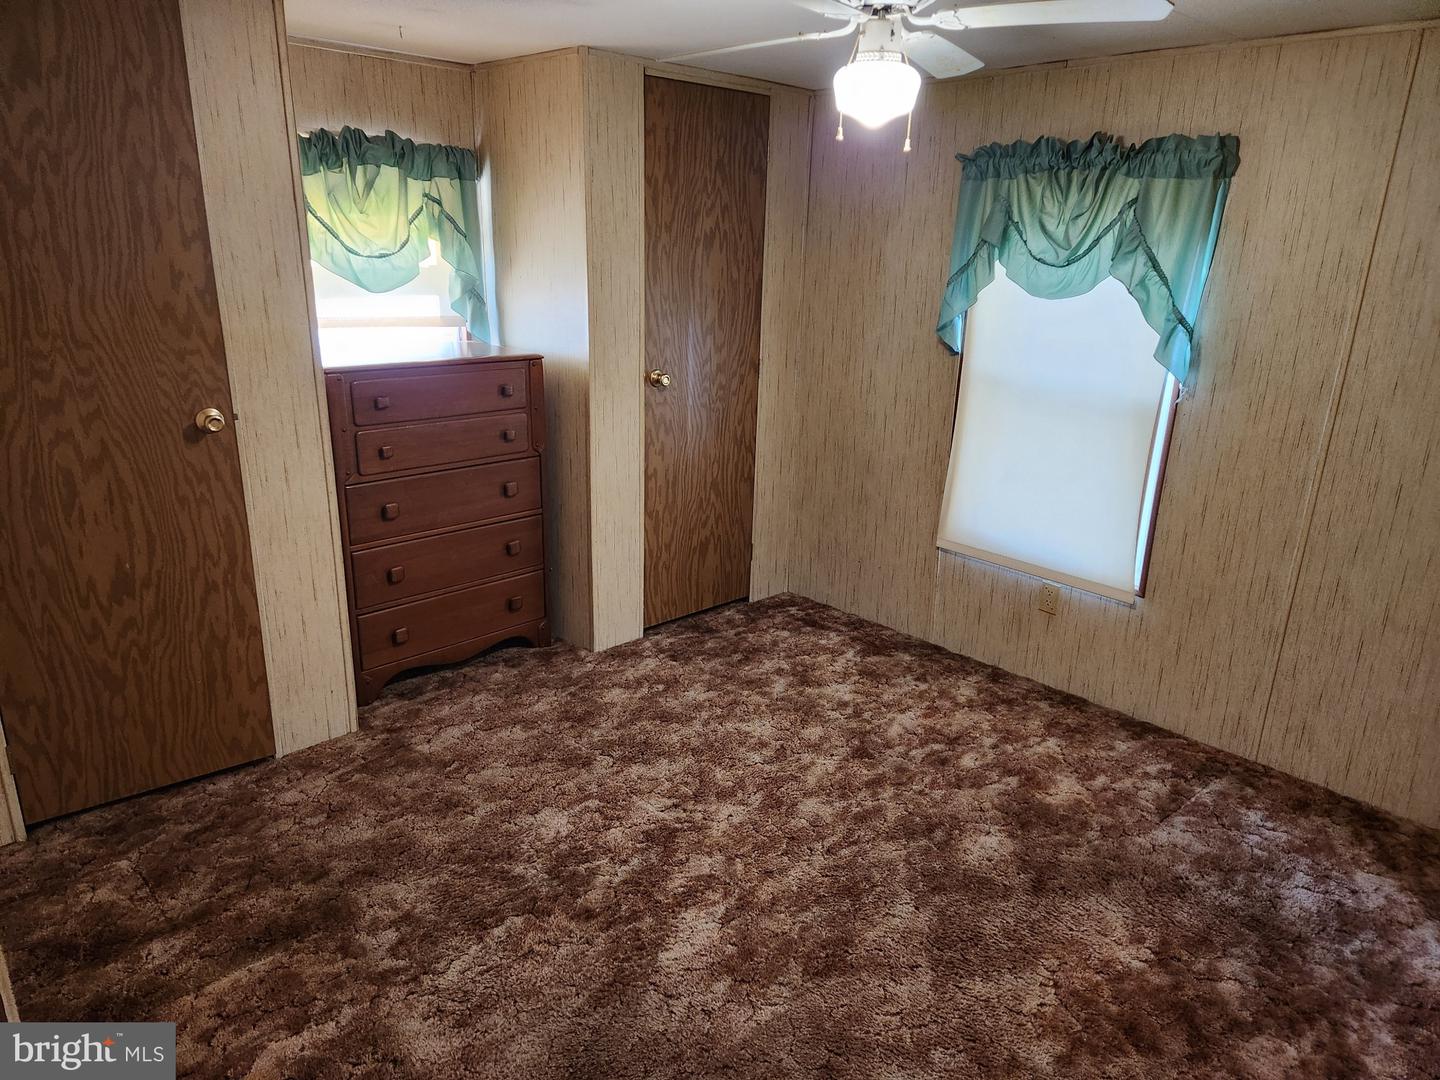 Photo 16 of 18 of 448 Aster mobile home